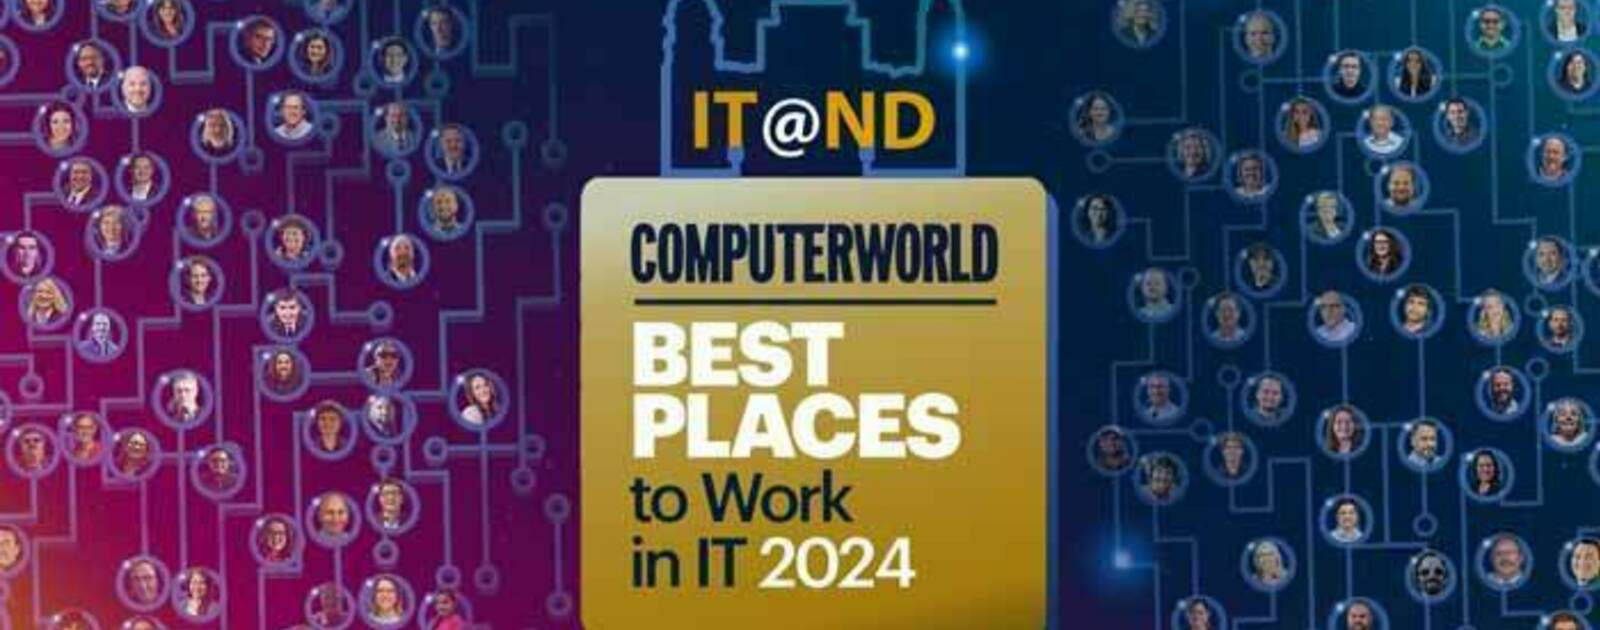 Computerworld Names Notre Dame to its 2024 List of Best Places to Work